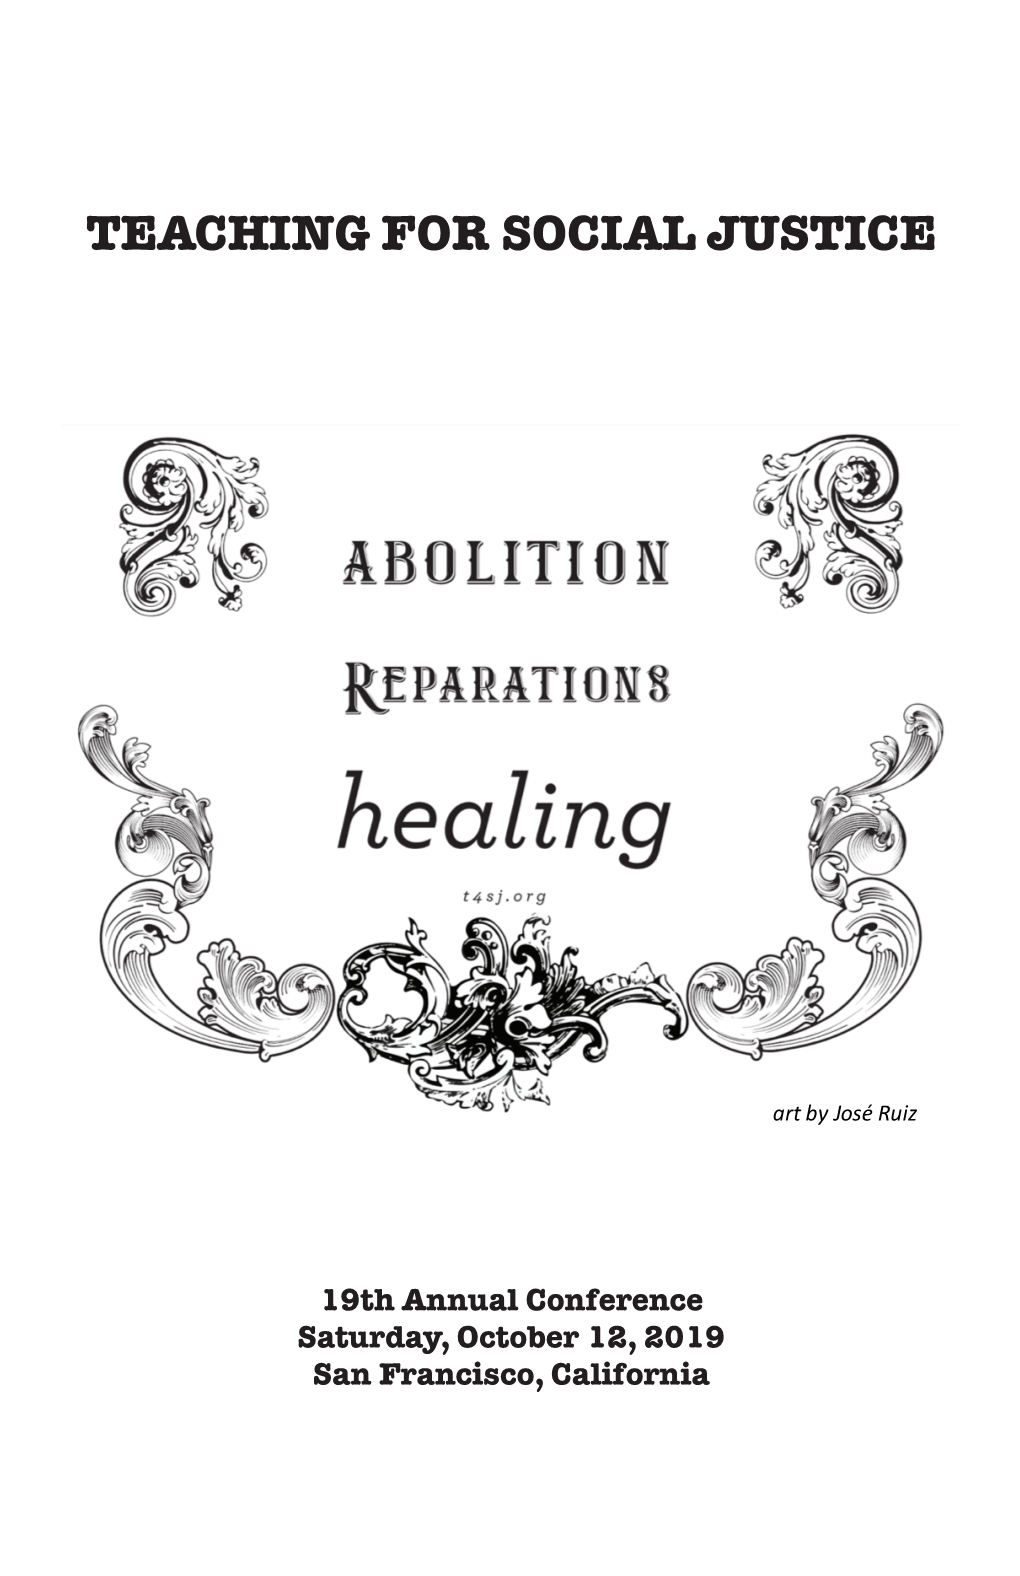 TEACHING for SOCIAL JUSTICE Abolition, Reparations & Healing